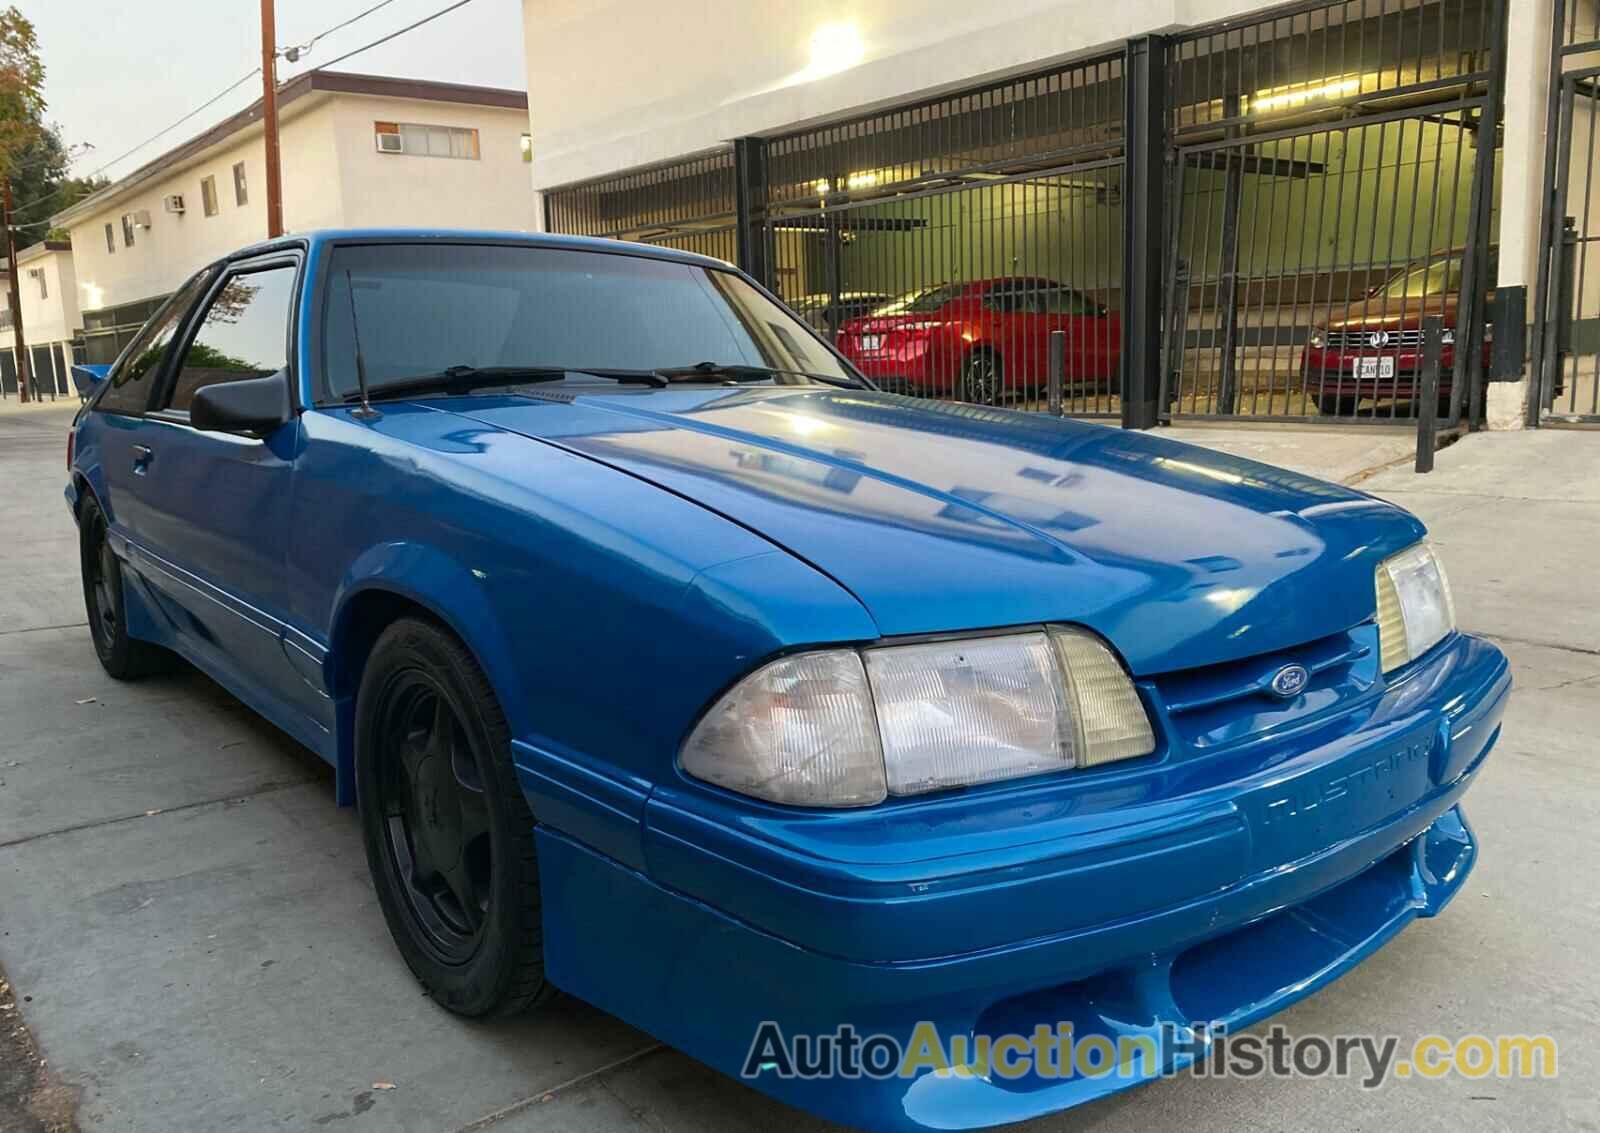 1990 FORD MUSTANG LX, 1FACP41E0LF143614